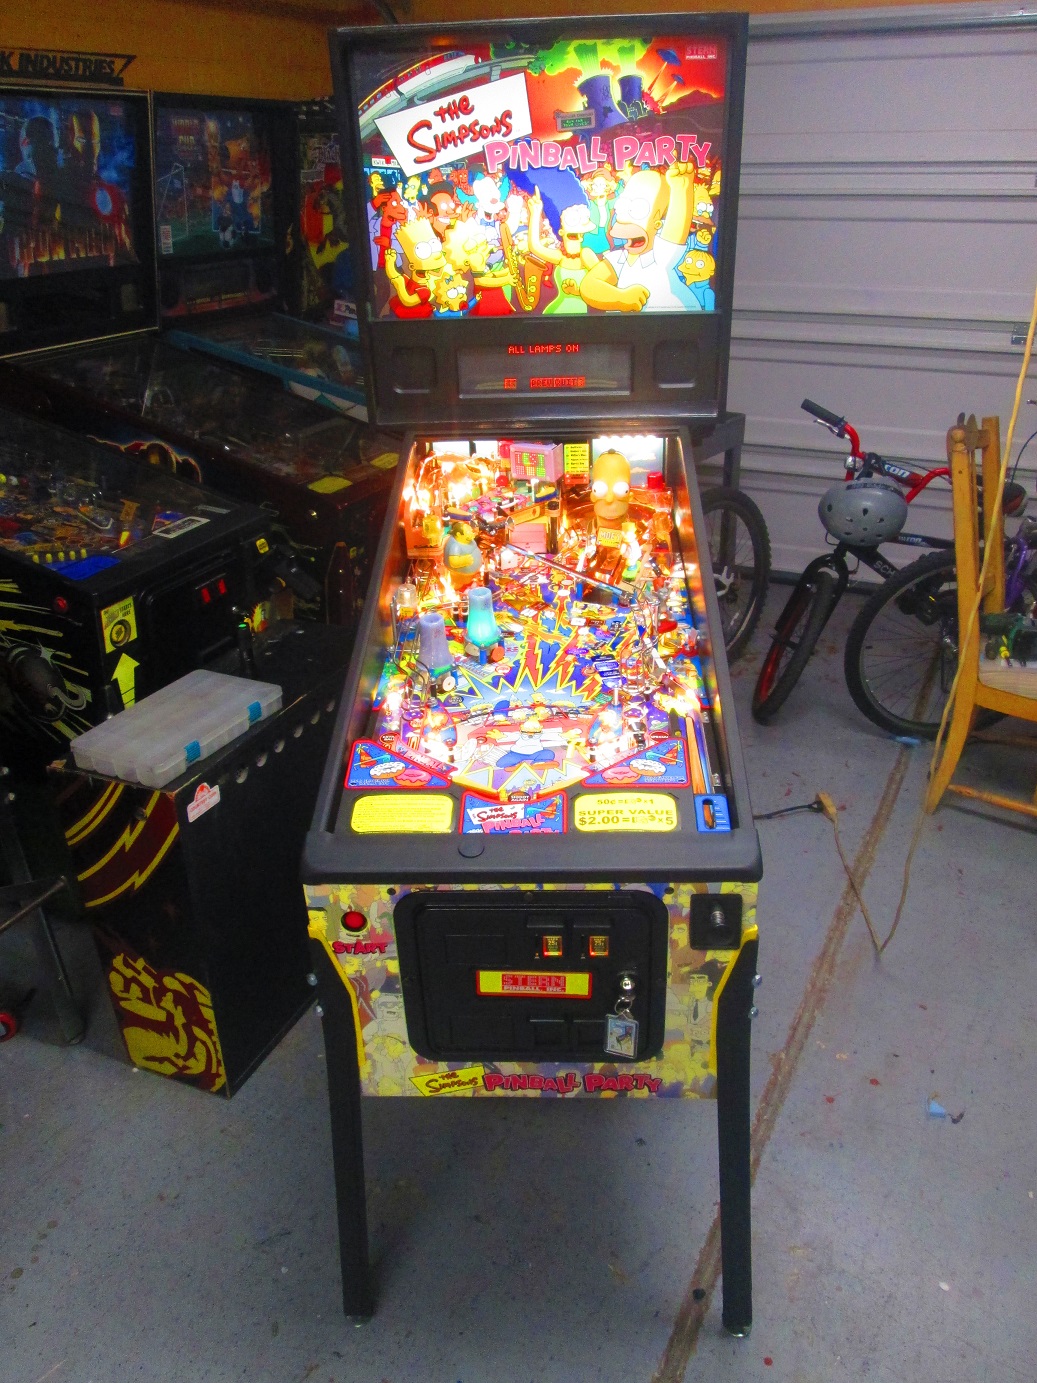 Stern came out with The Simpsons Pinball Party in 2003, and went on to produce around 4,000 machines. (IPDB)